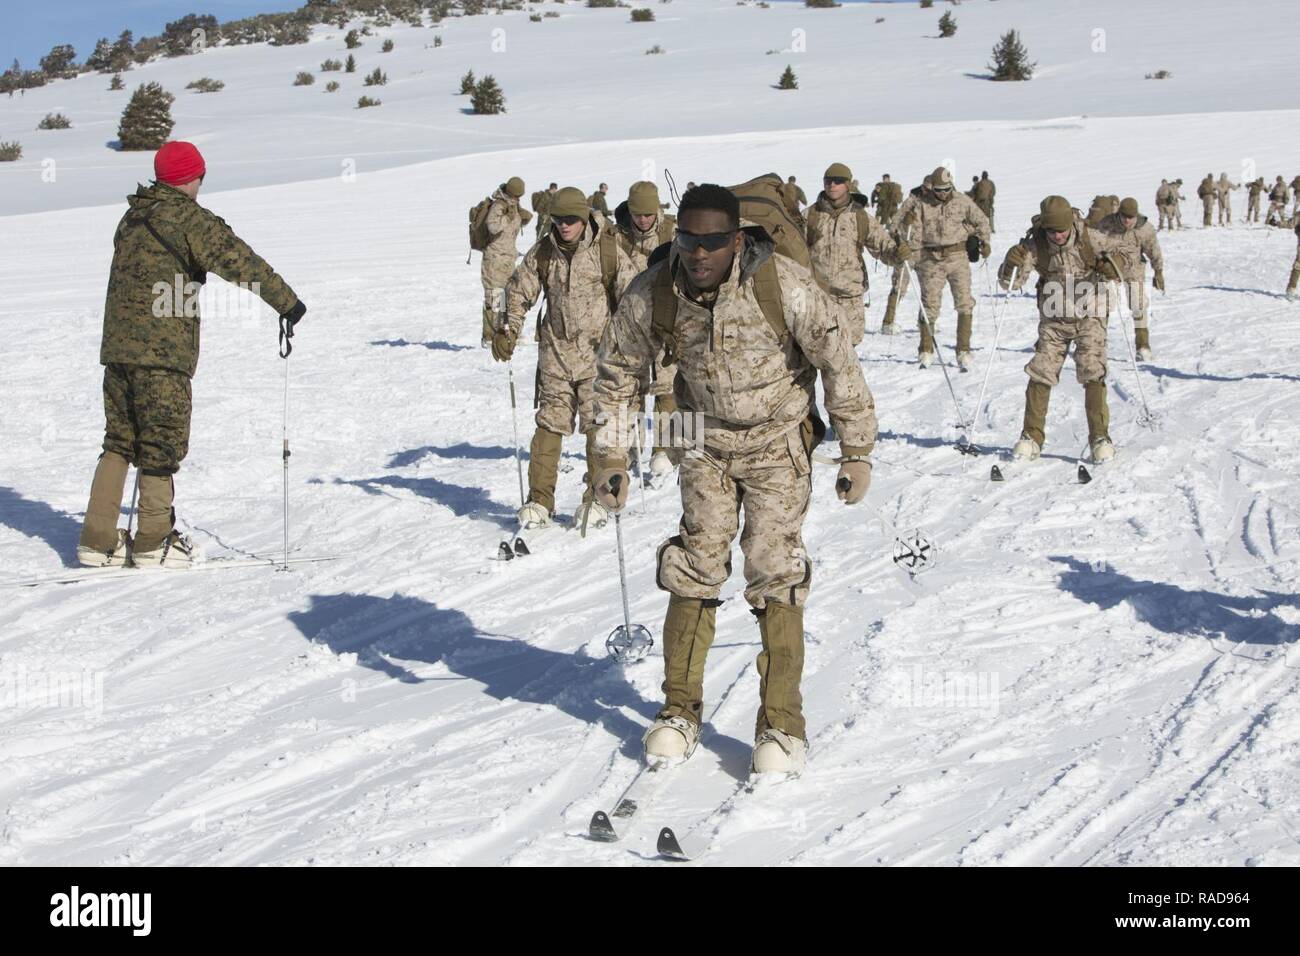 U.S. Marines with 2nd Battalion, 2nd Marine Regiment (2/2), conduct a ski exercise during a month-long Deployment for Training (DFT), at the Marine Corps Mountain Warfare Training Center (MCMWTC), Bridgeport, CA., Jan. 15, 2017. The Marines of 2/2 participated in month-long DFT at MCMWTC to prepare them for the challenges of operating in cold and mountainous environments. Stock Photo